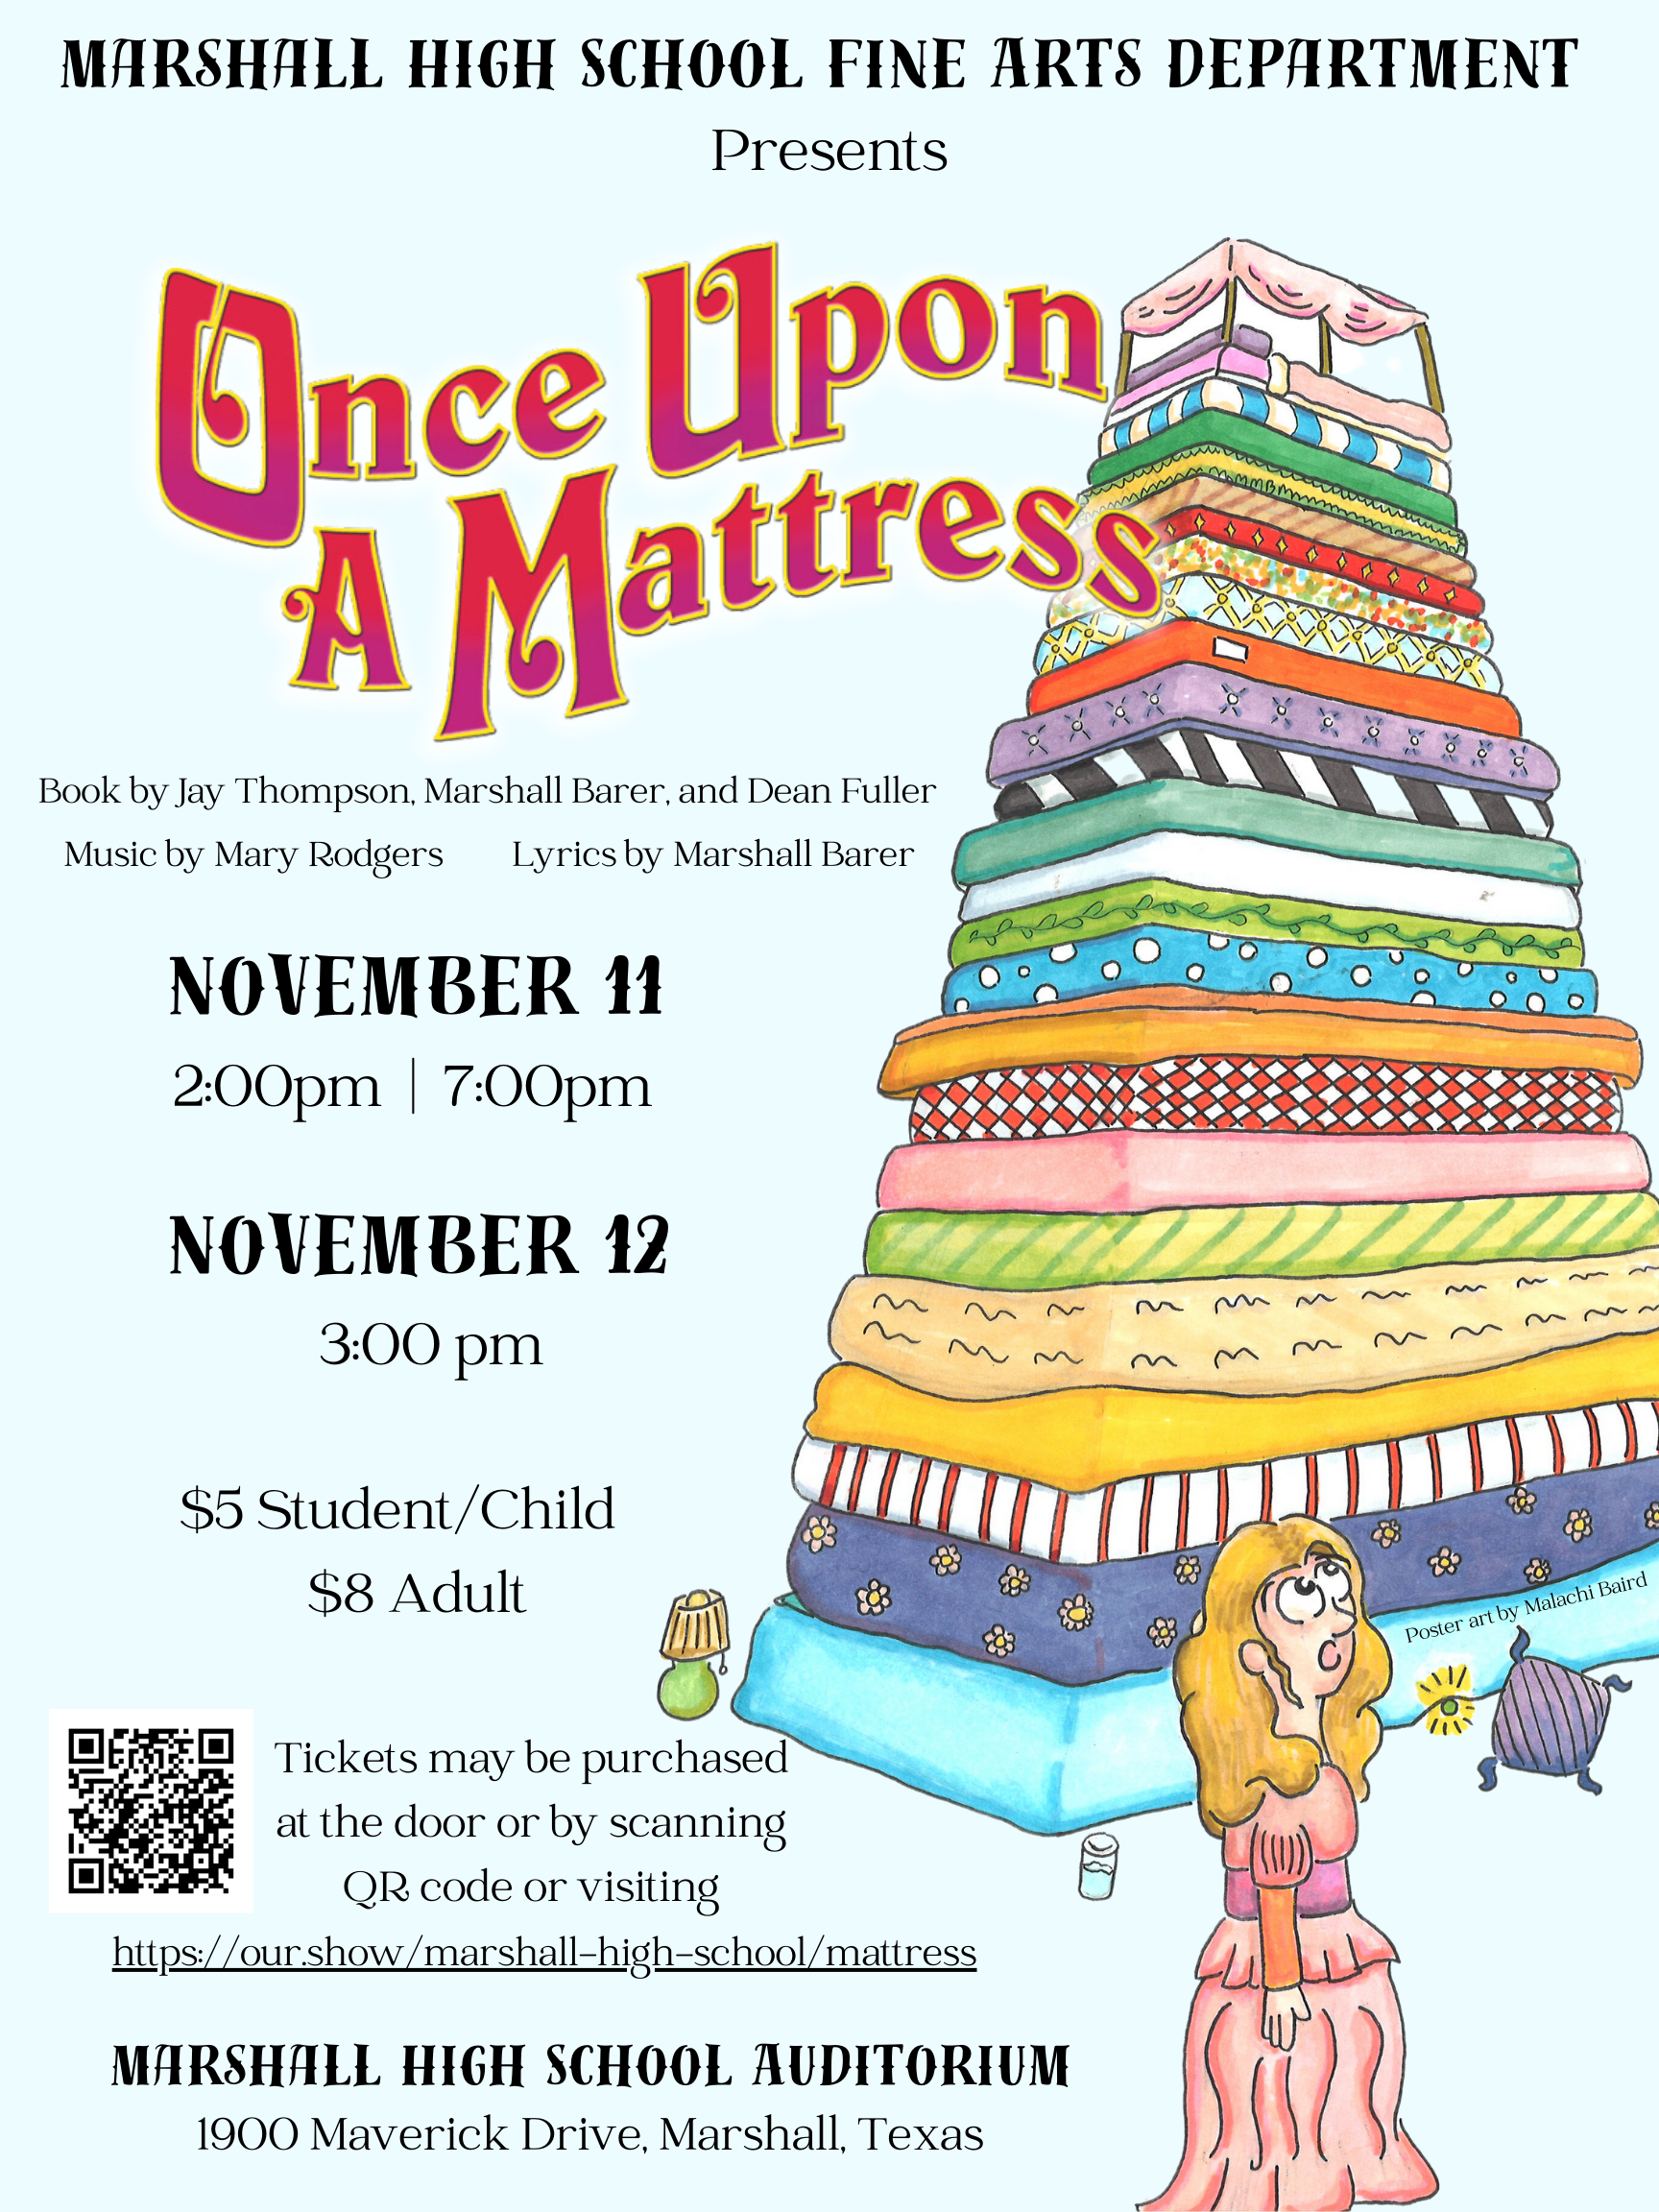 Marshall HIgh School Fine Arts Department presents Once Upon a Mattress. November 11 at 2:00pm and 7:00pm, and on November 12  at 3:00 pm. Tickets are $5 for students and $8 for adults. Tickets can be purchased at the door or by visiting https://our.show/marshall-high-school/mattress. Show will take place at Marshall HIgh School Auditorium 1900 Maverick Drive, Marshall, TX